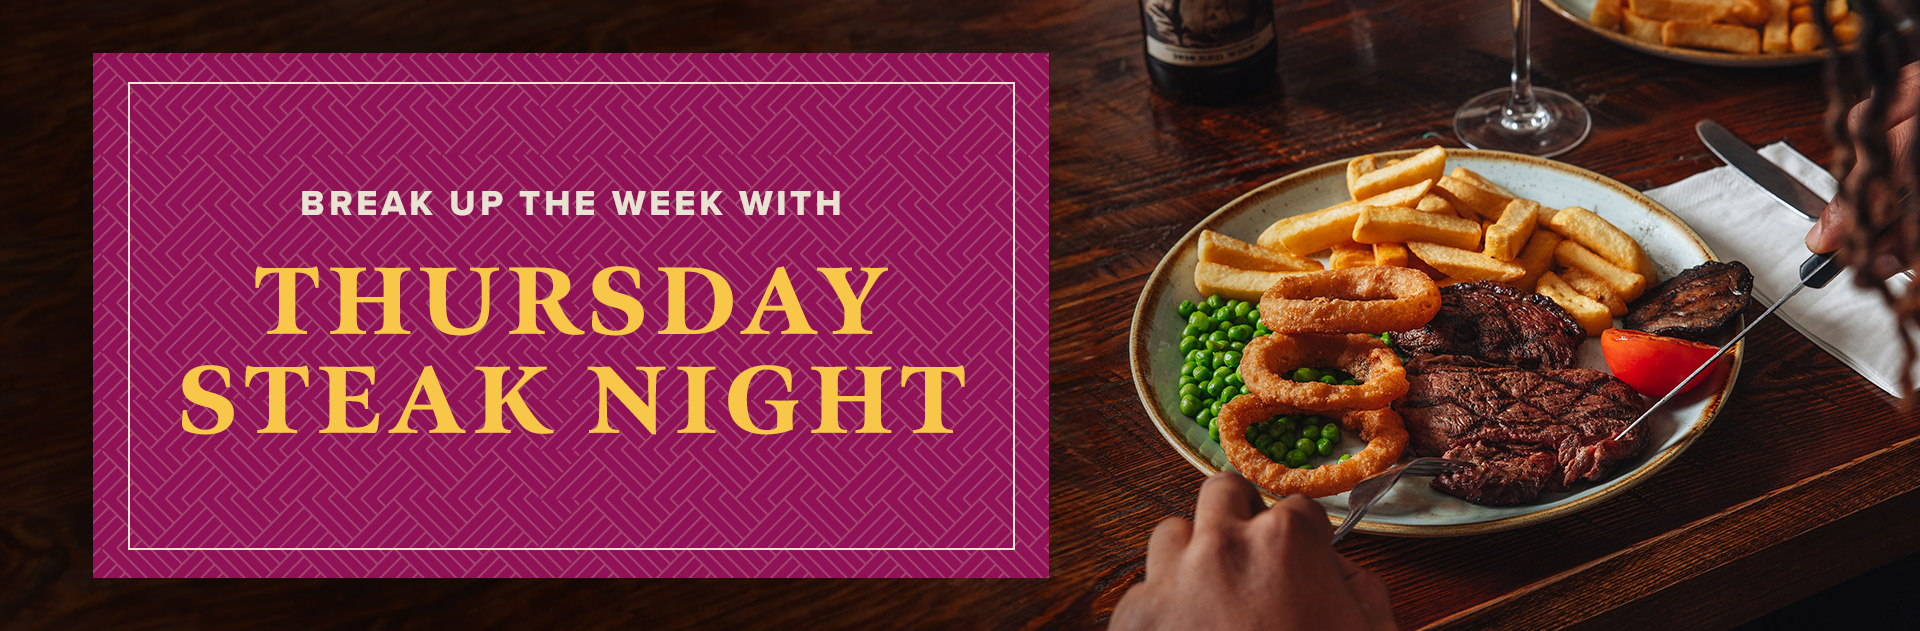 Thursday Steak Night at The Country Girl